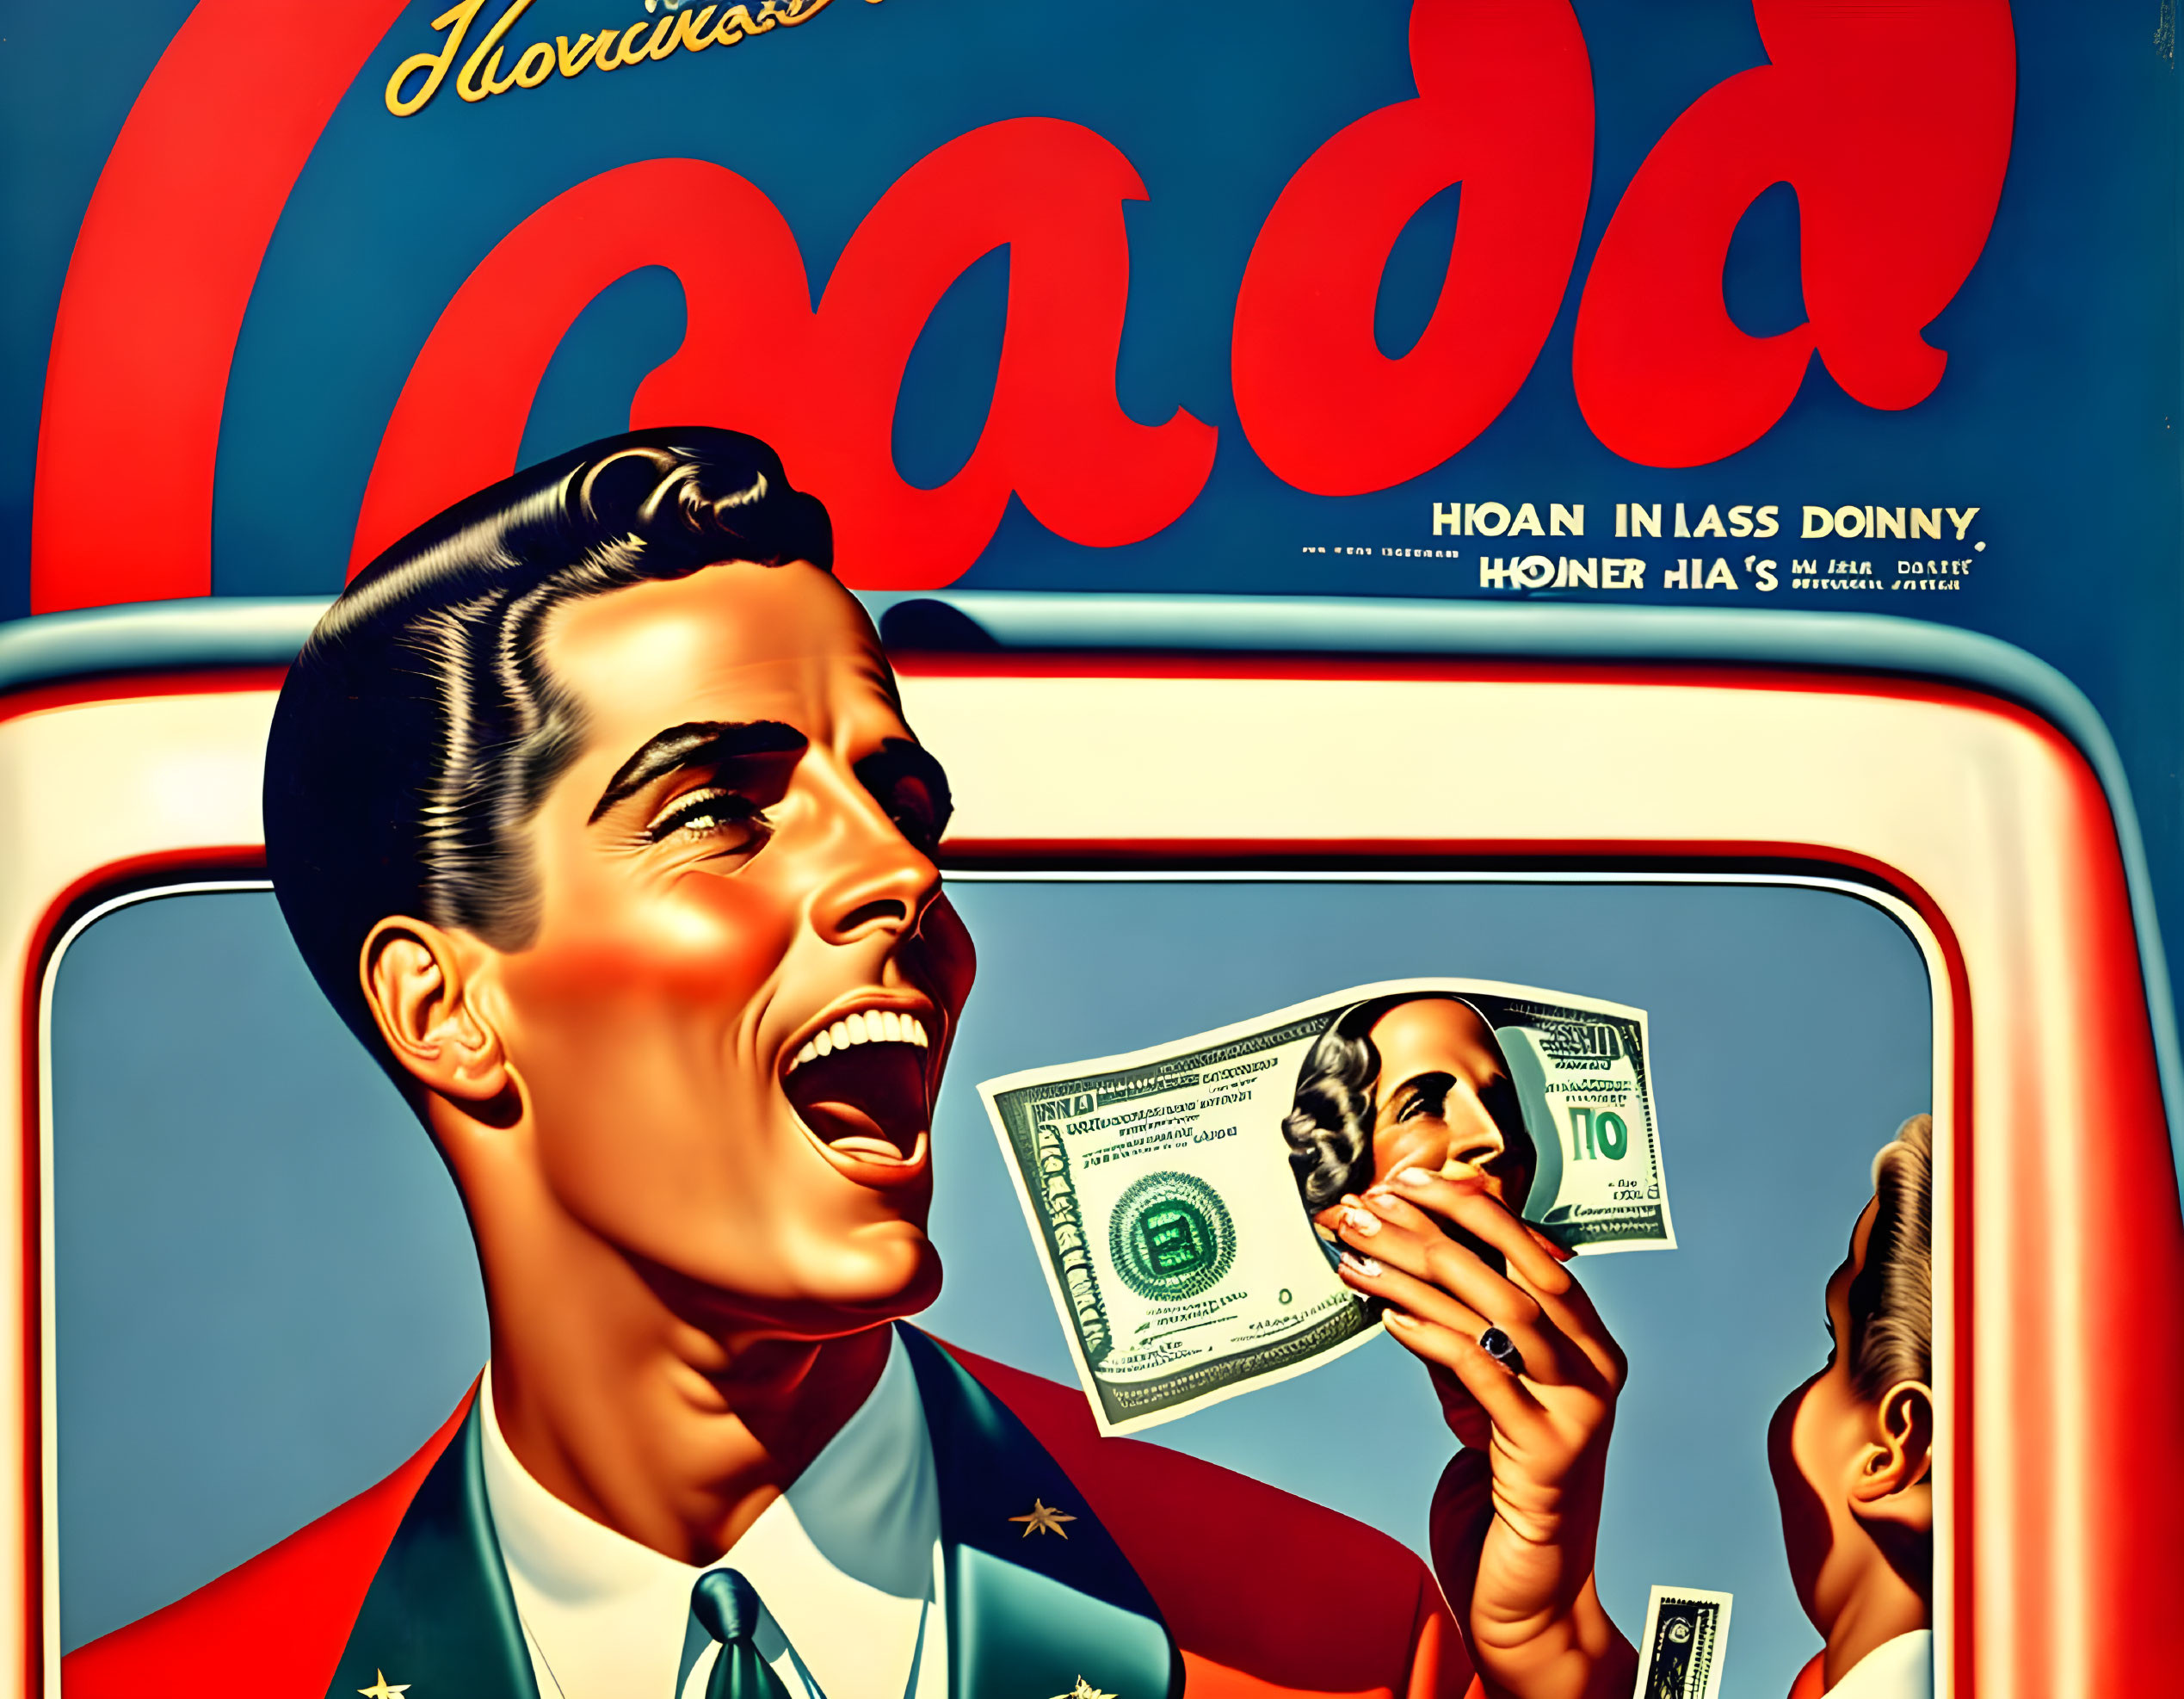 Smiling man holding money with woman reflected in teeth in vintage-style ad